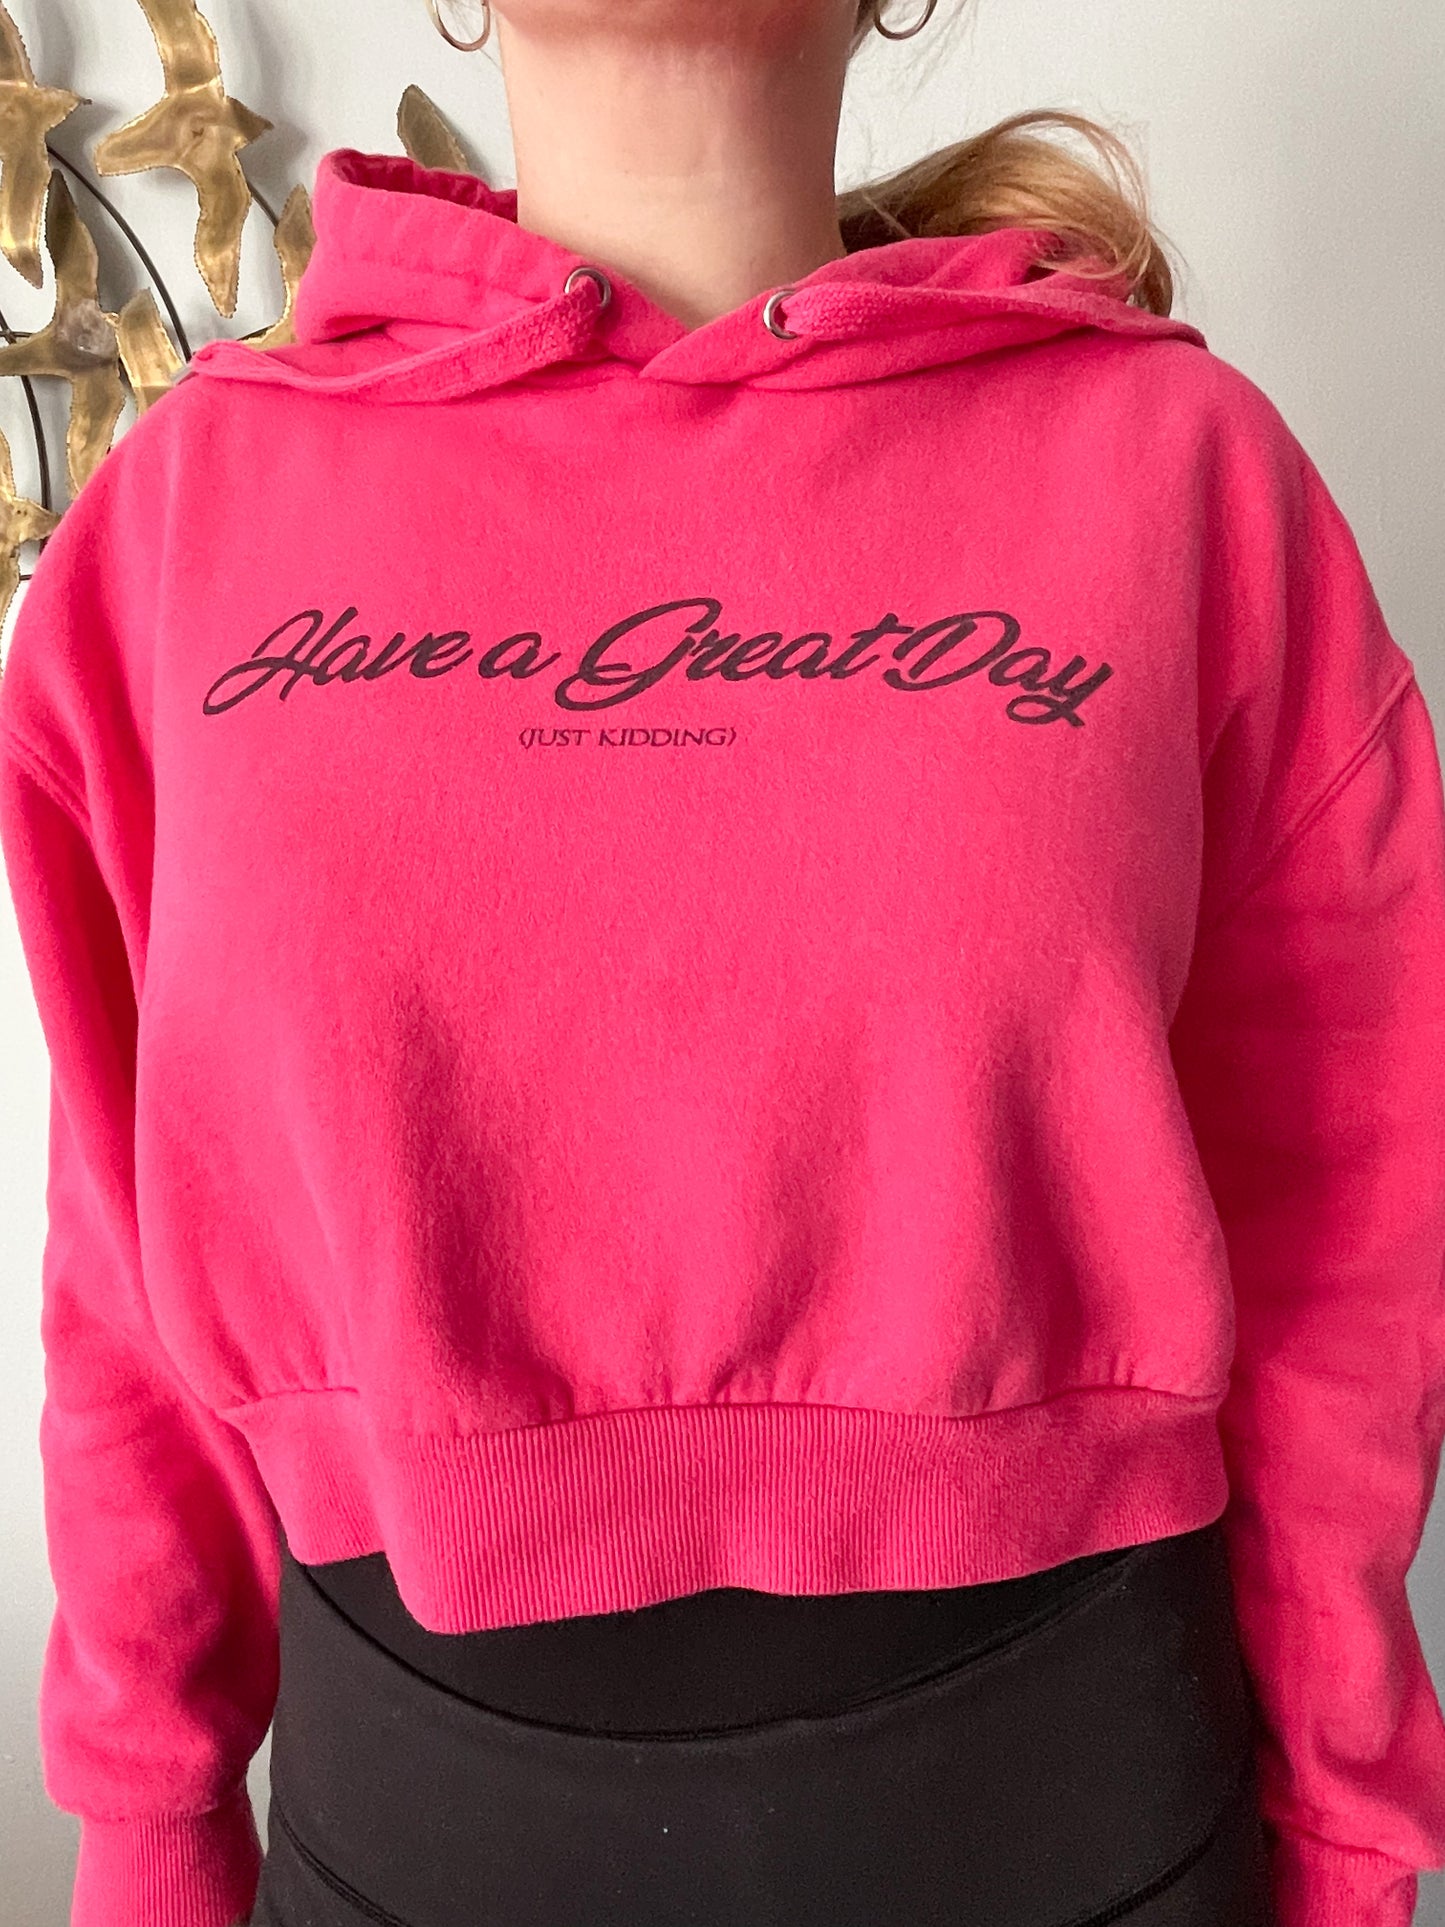 Have a Great Day Ironic Graphic Pink Cropped Hoodie Sweater - S/M/L